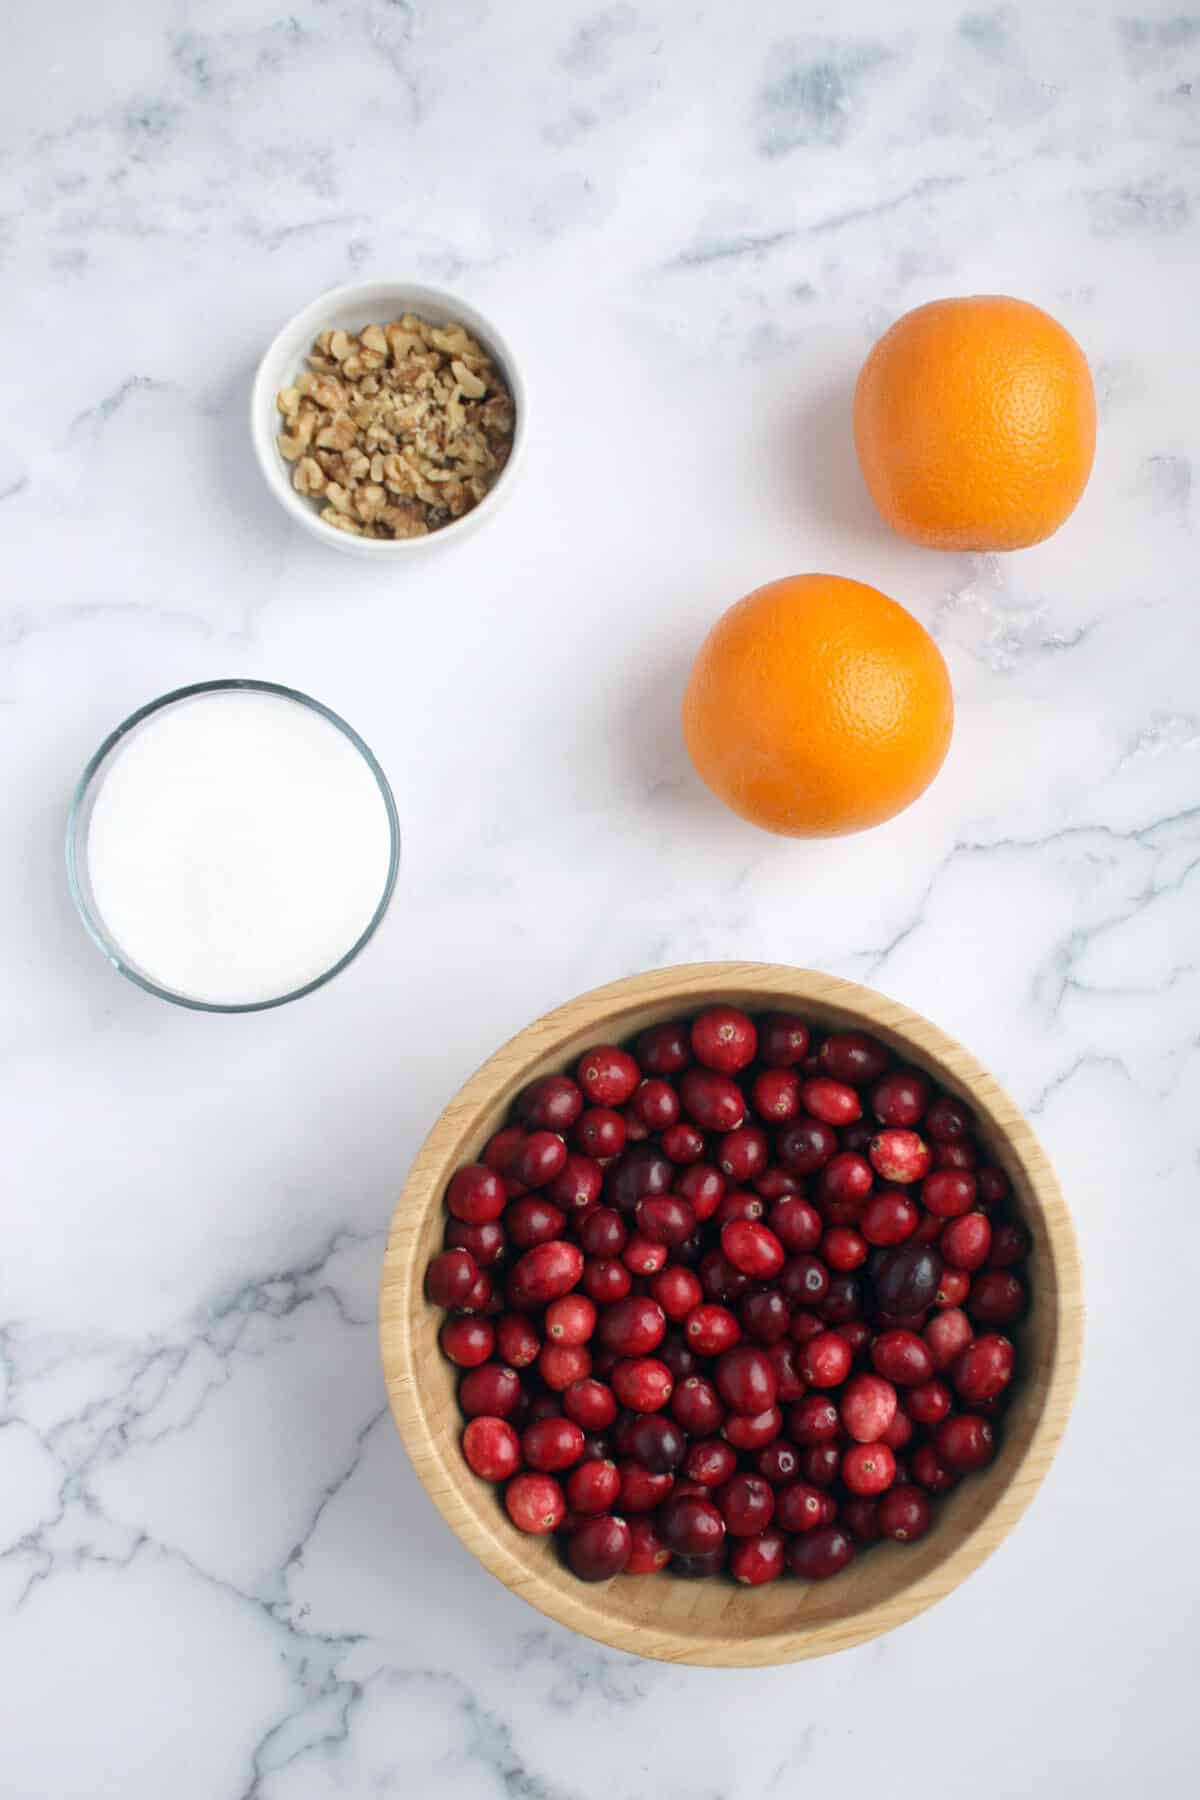 the ingredients for cranberry orange relish